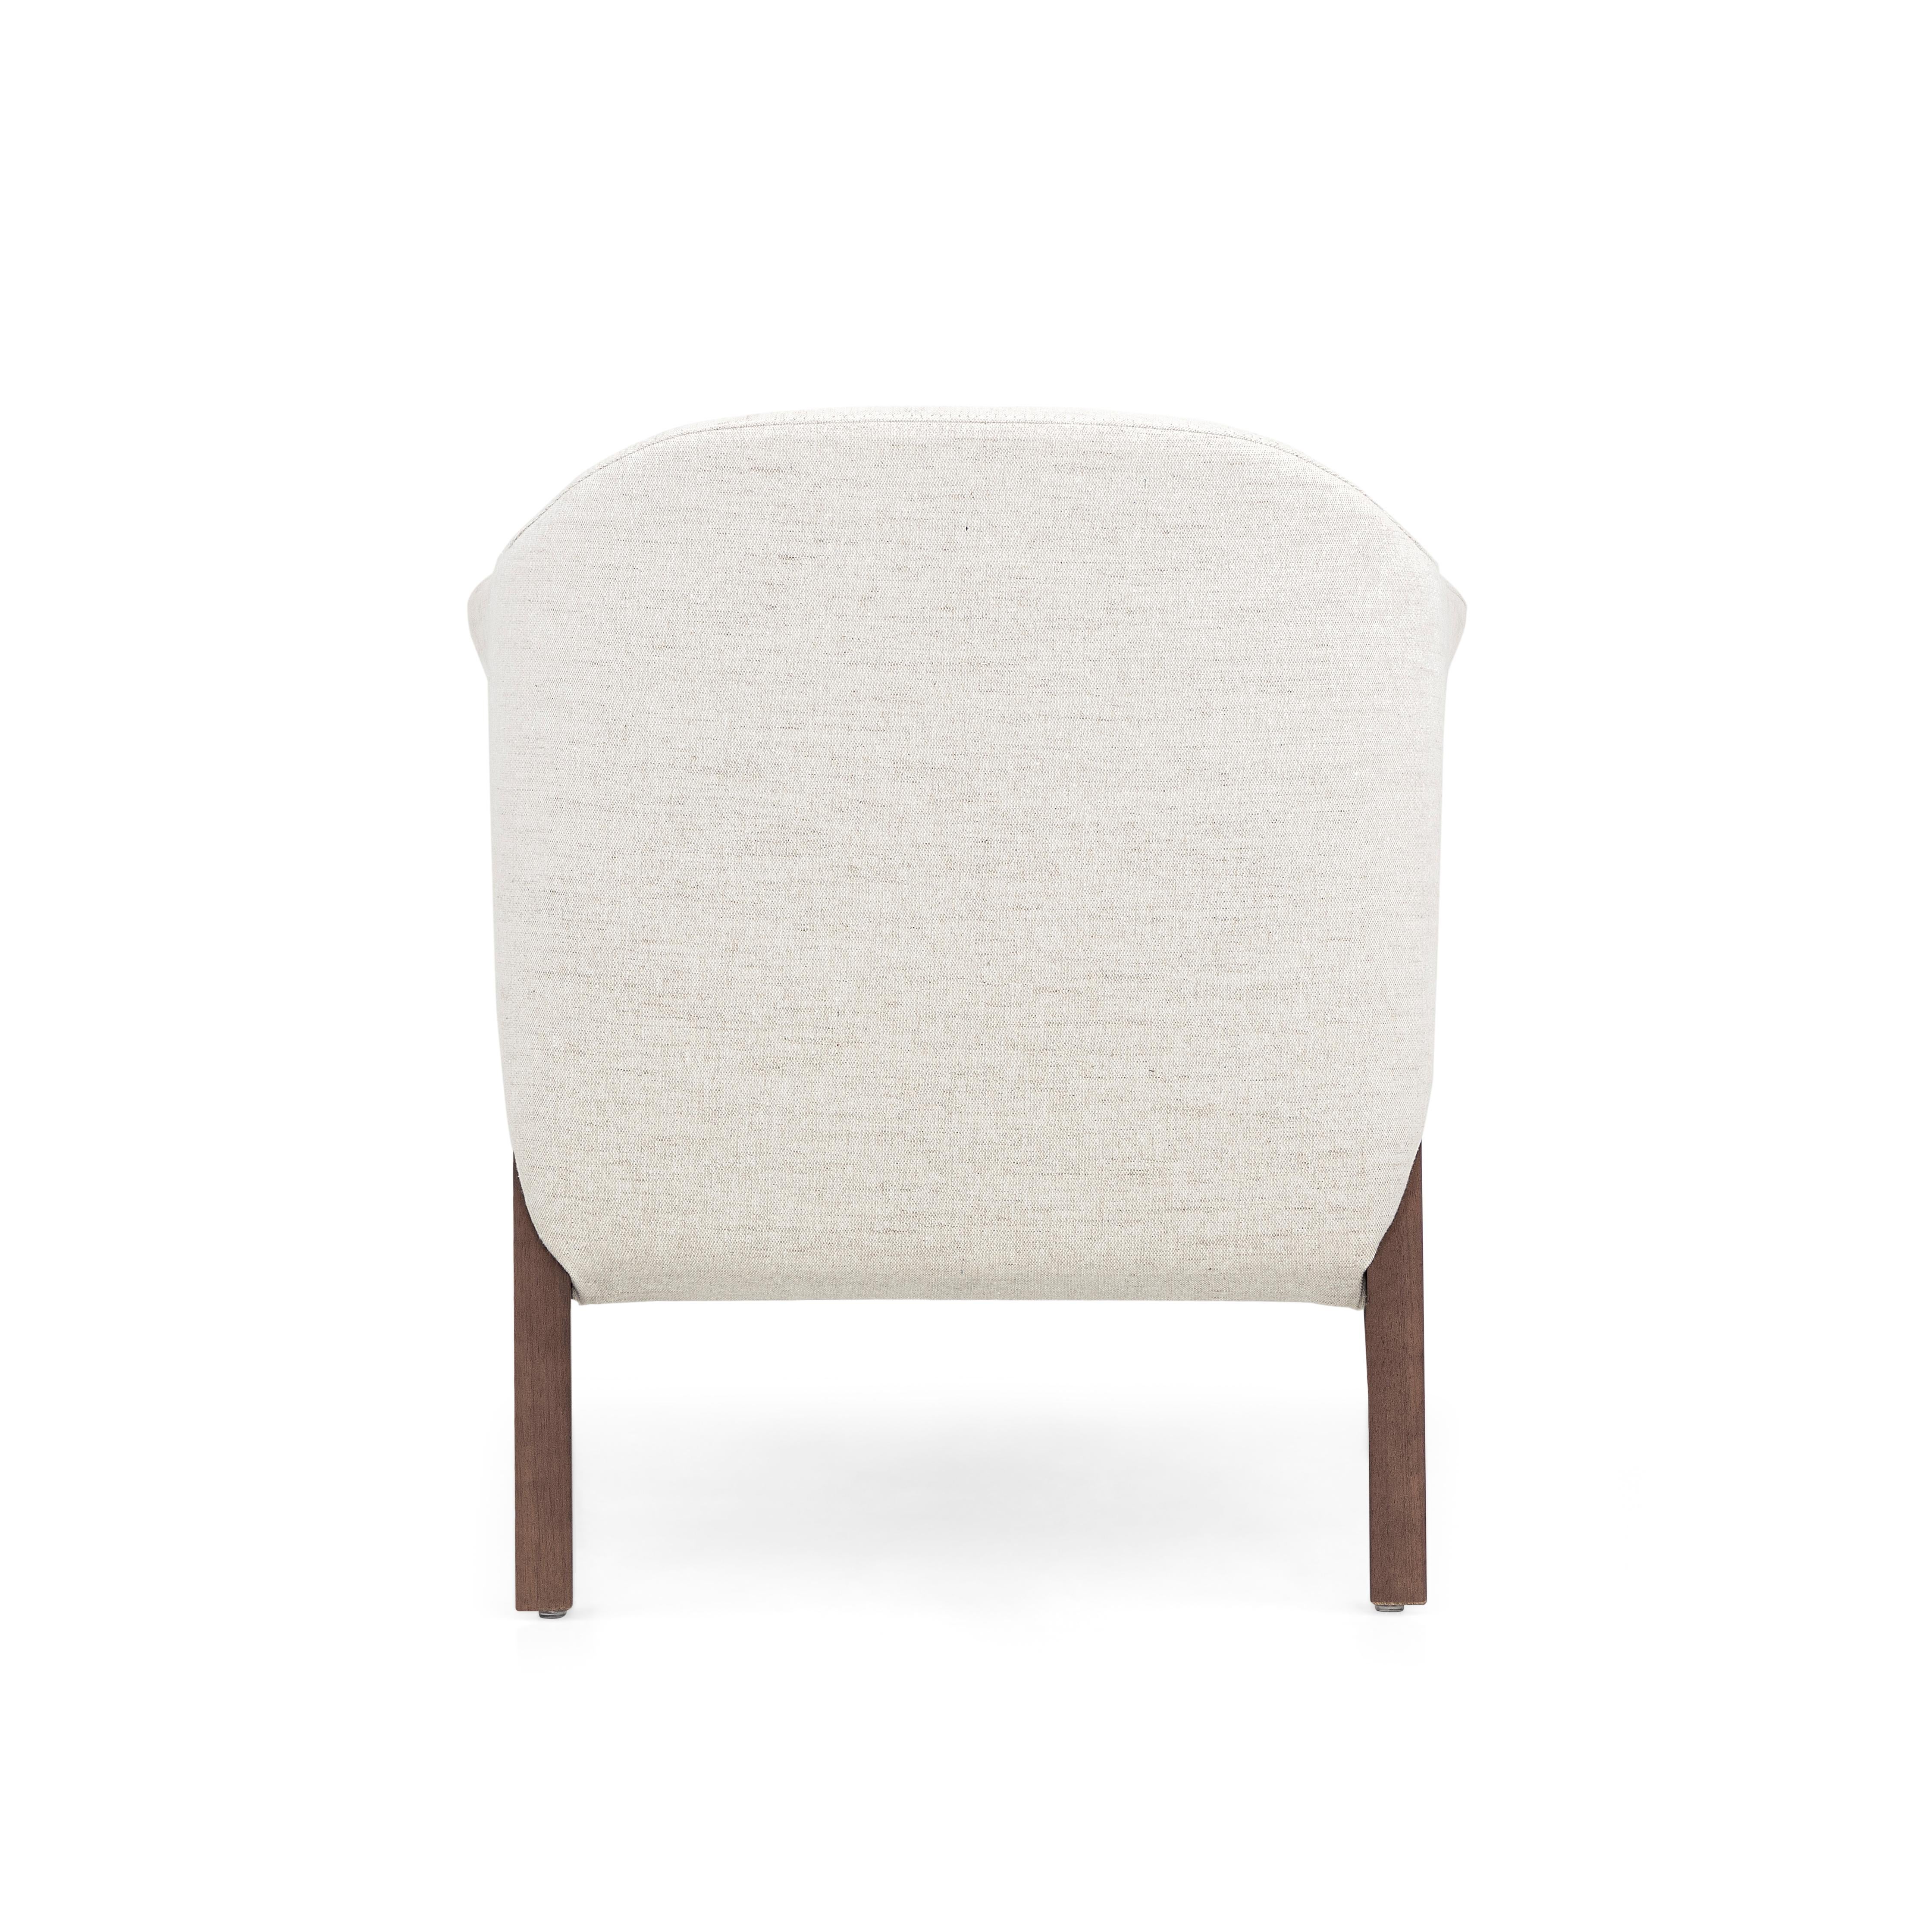 Osa Upholstered Armchair in Walnut Wood Finish Frame and Off-White Fabric In New Condition For Sale In Miami, FL